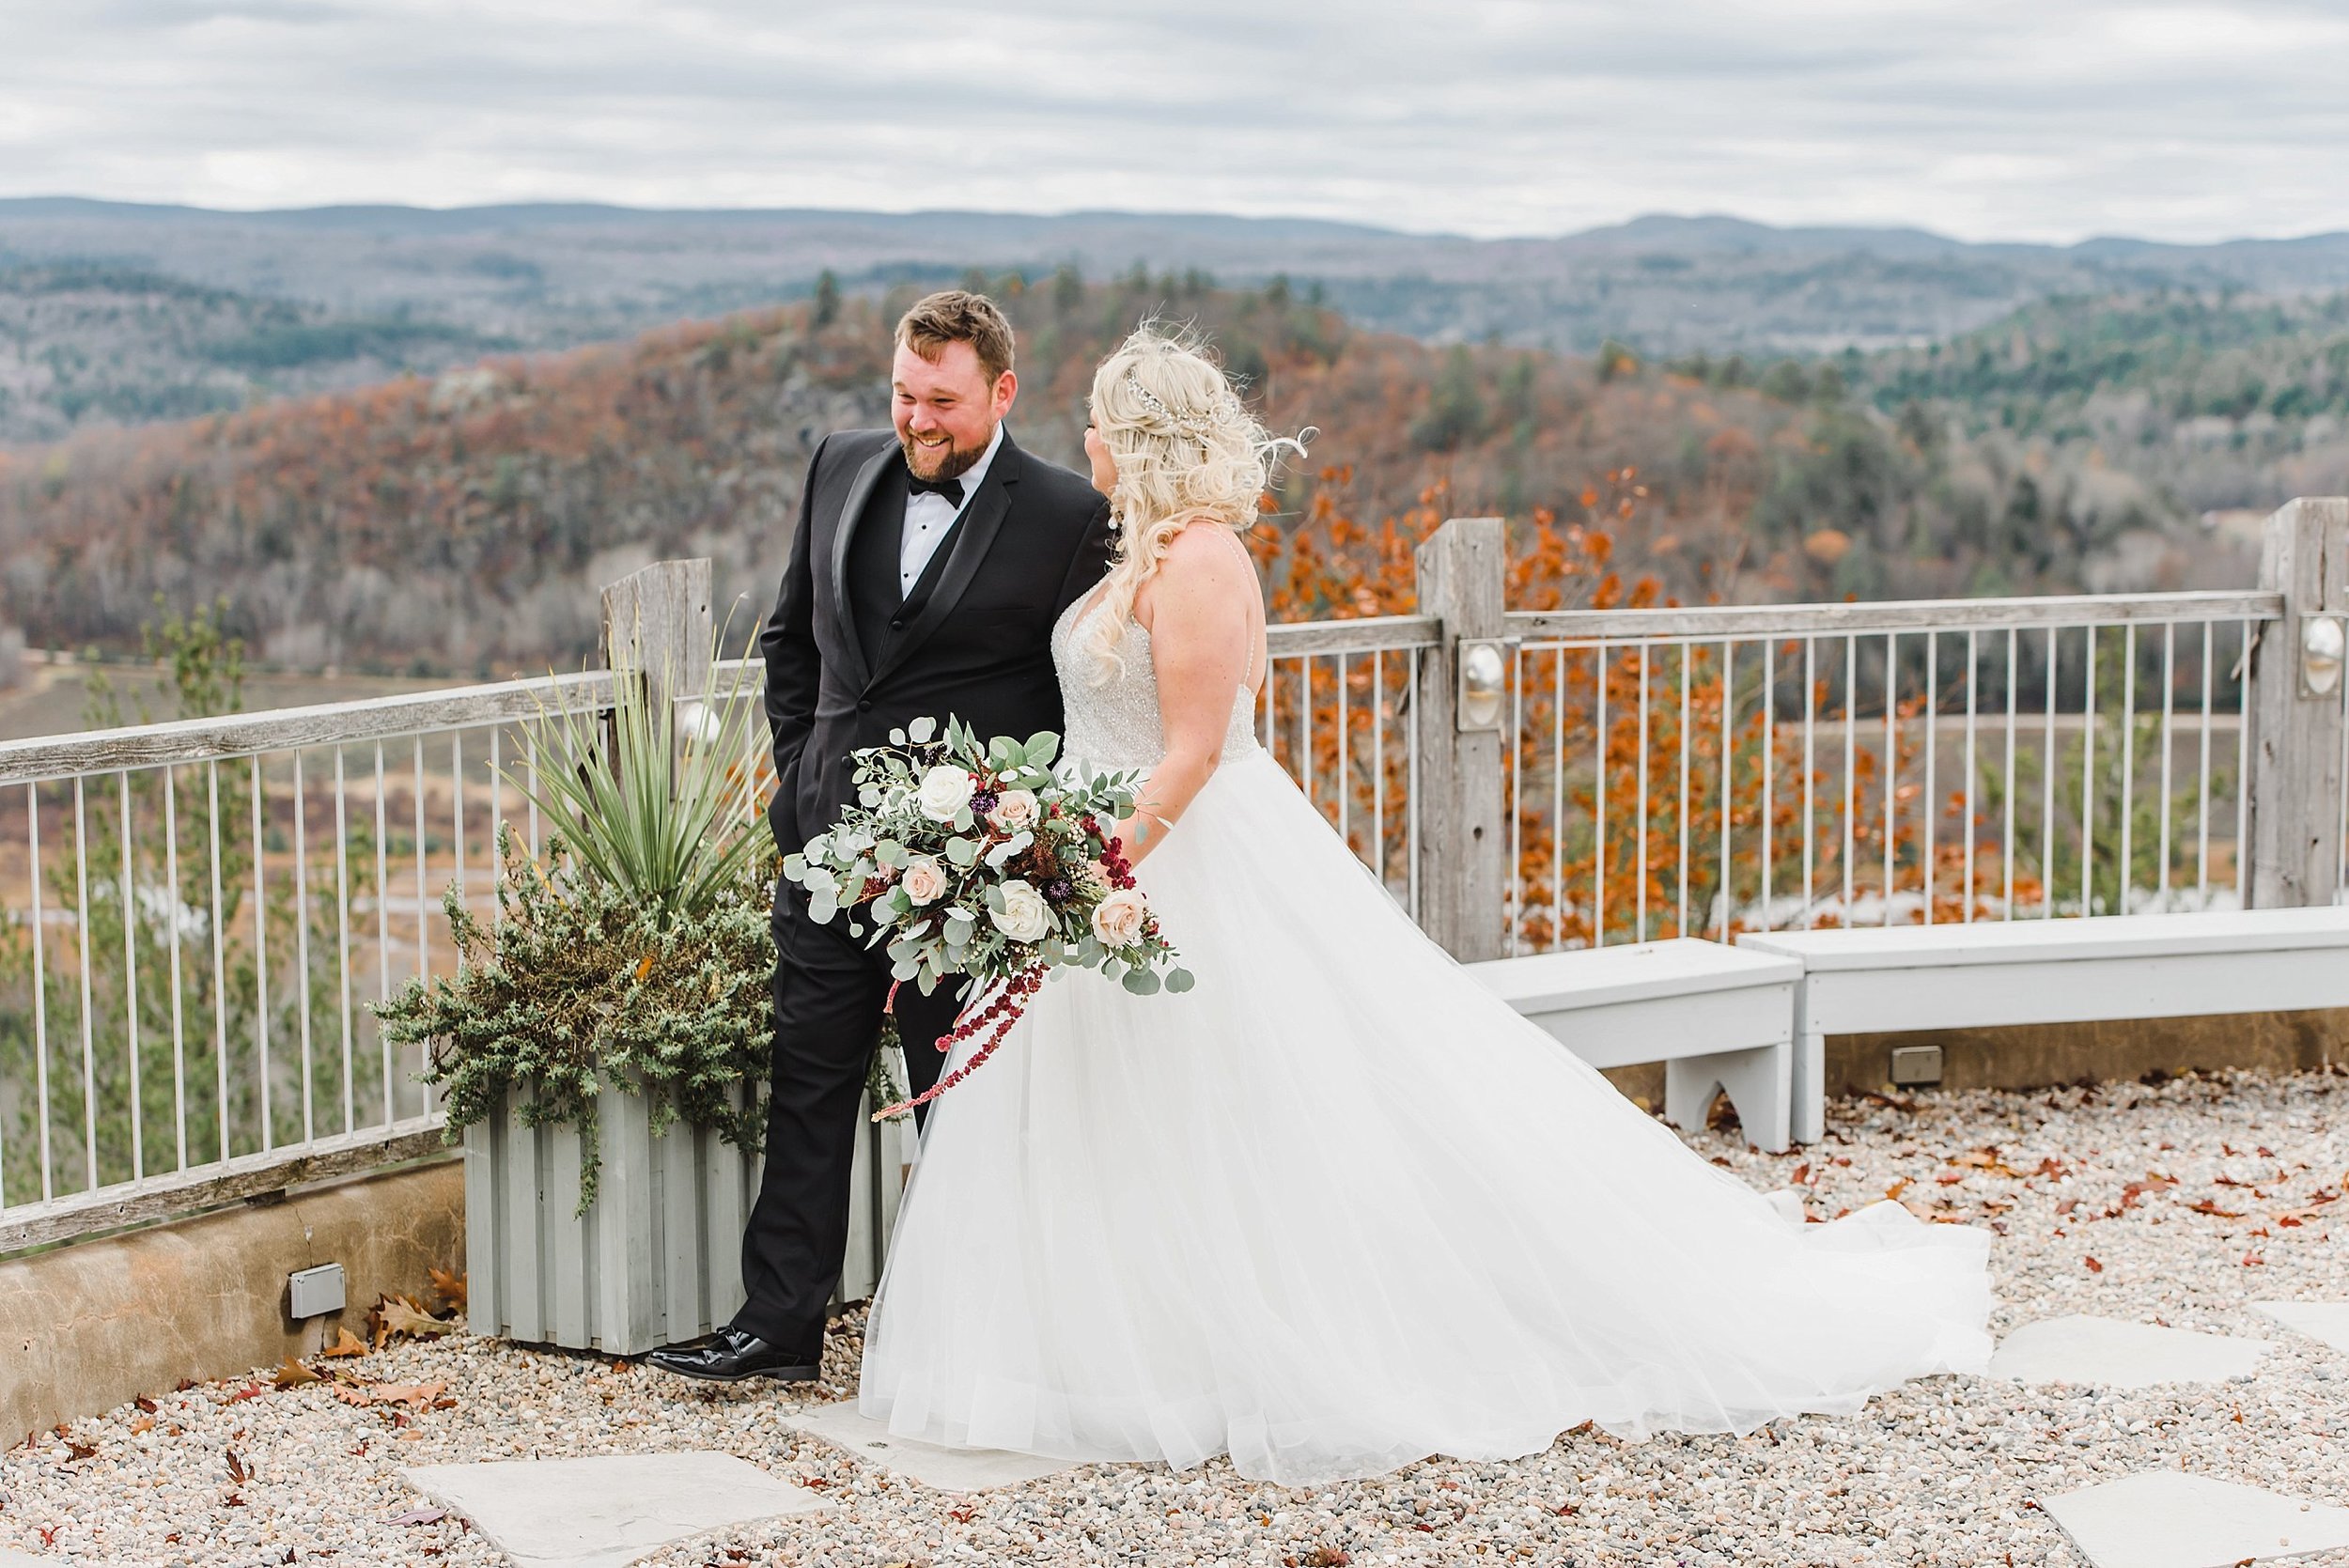  We scheduled lots of time for their first look and bride-groom photos.  Because of this, they had an opportunity to take a ‘warm-up’ break in between.  The wind was chilling, but they were so good at working through the weather together! 